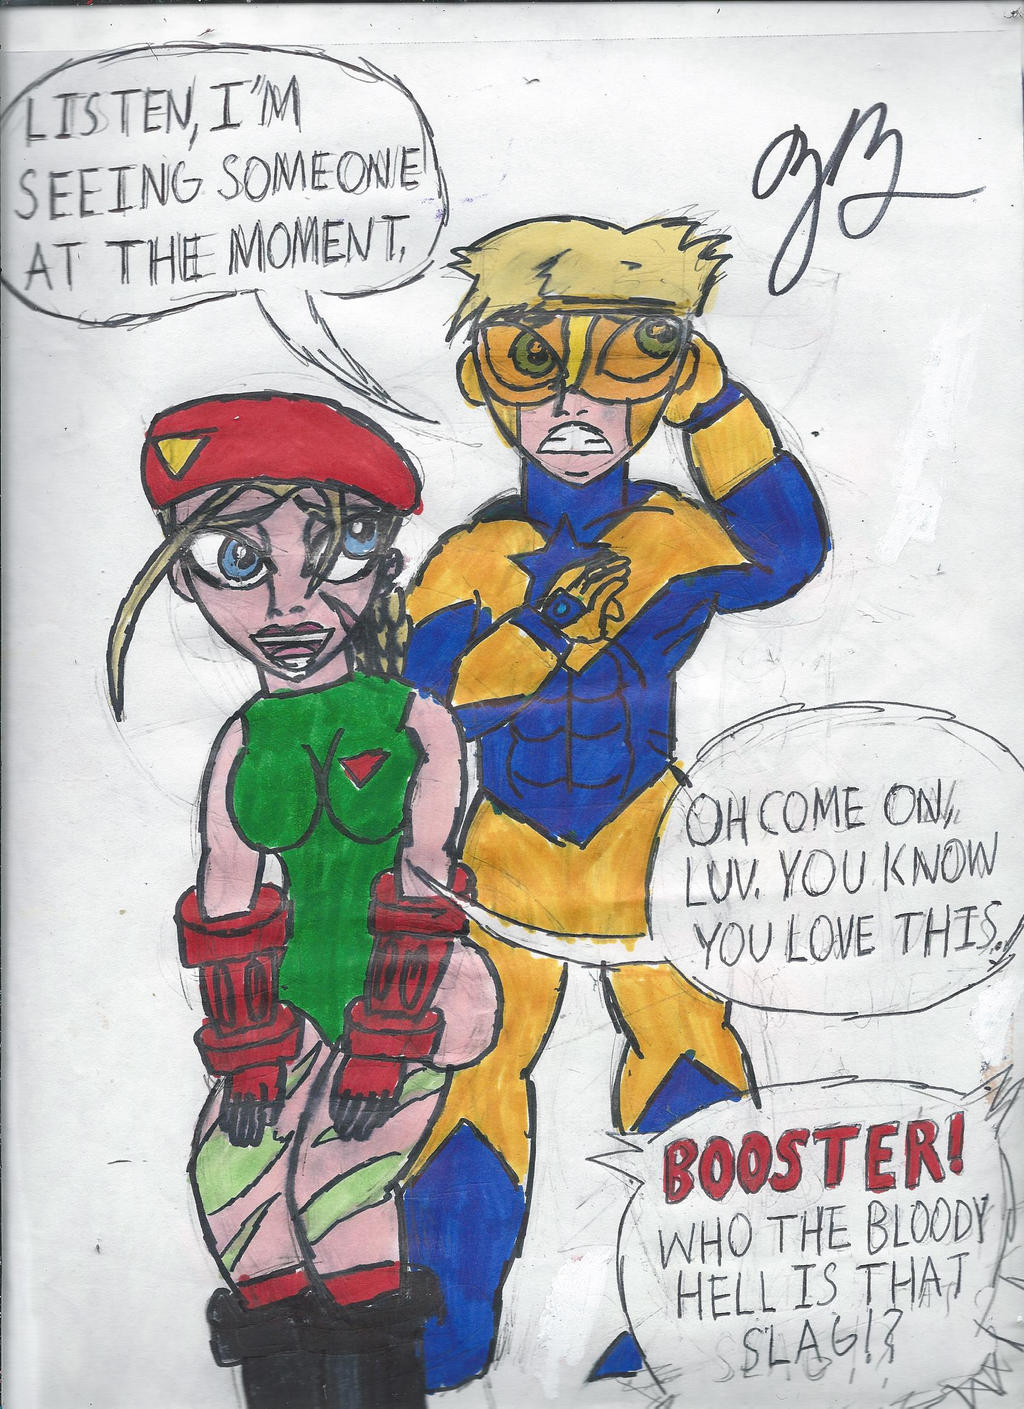 Flirting with Booster